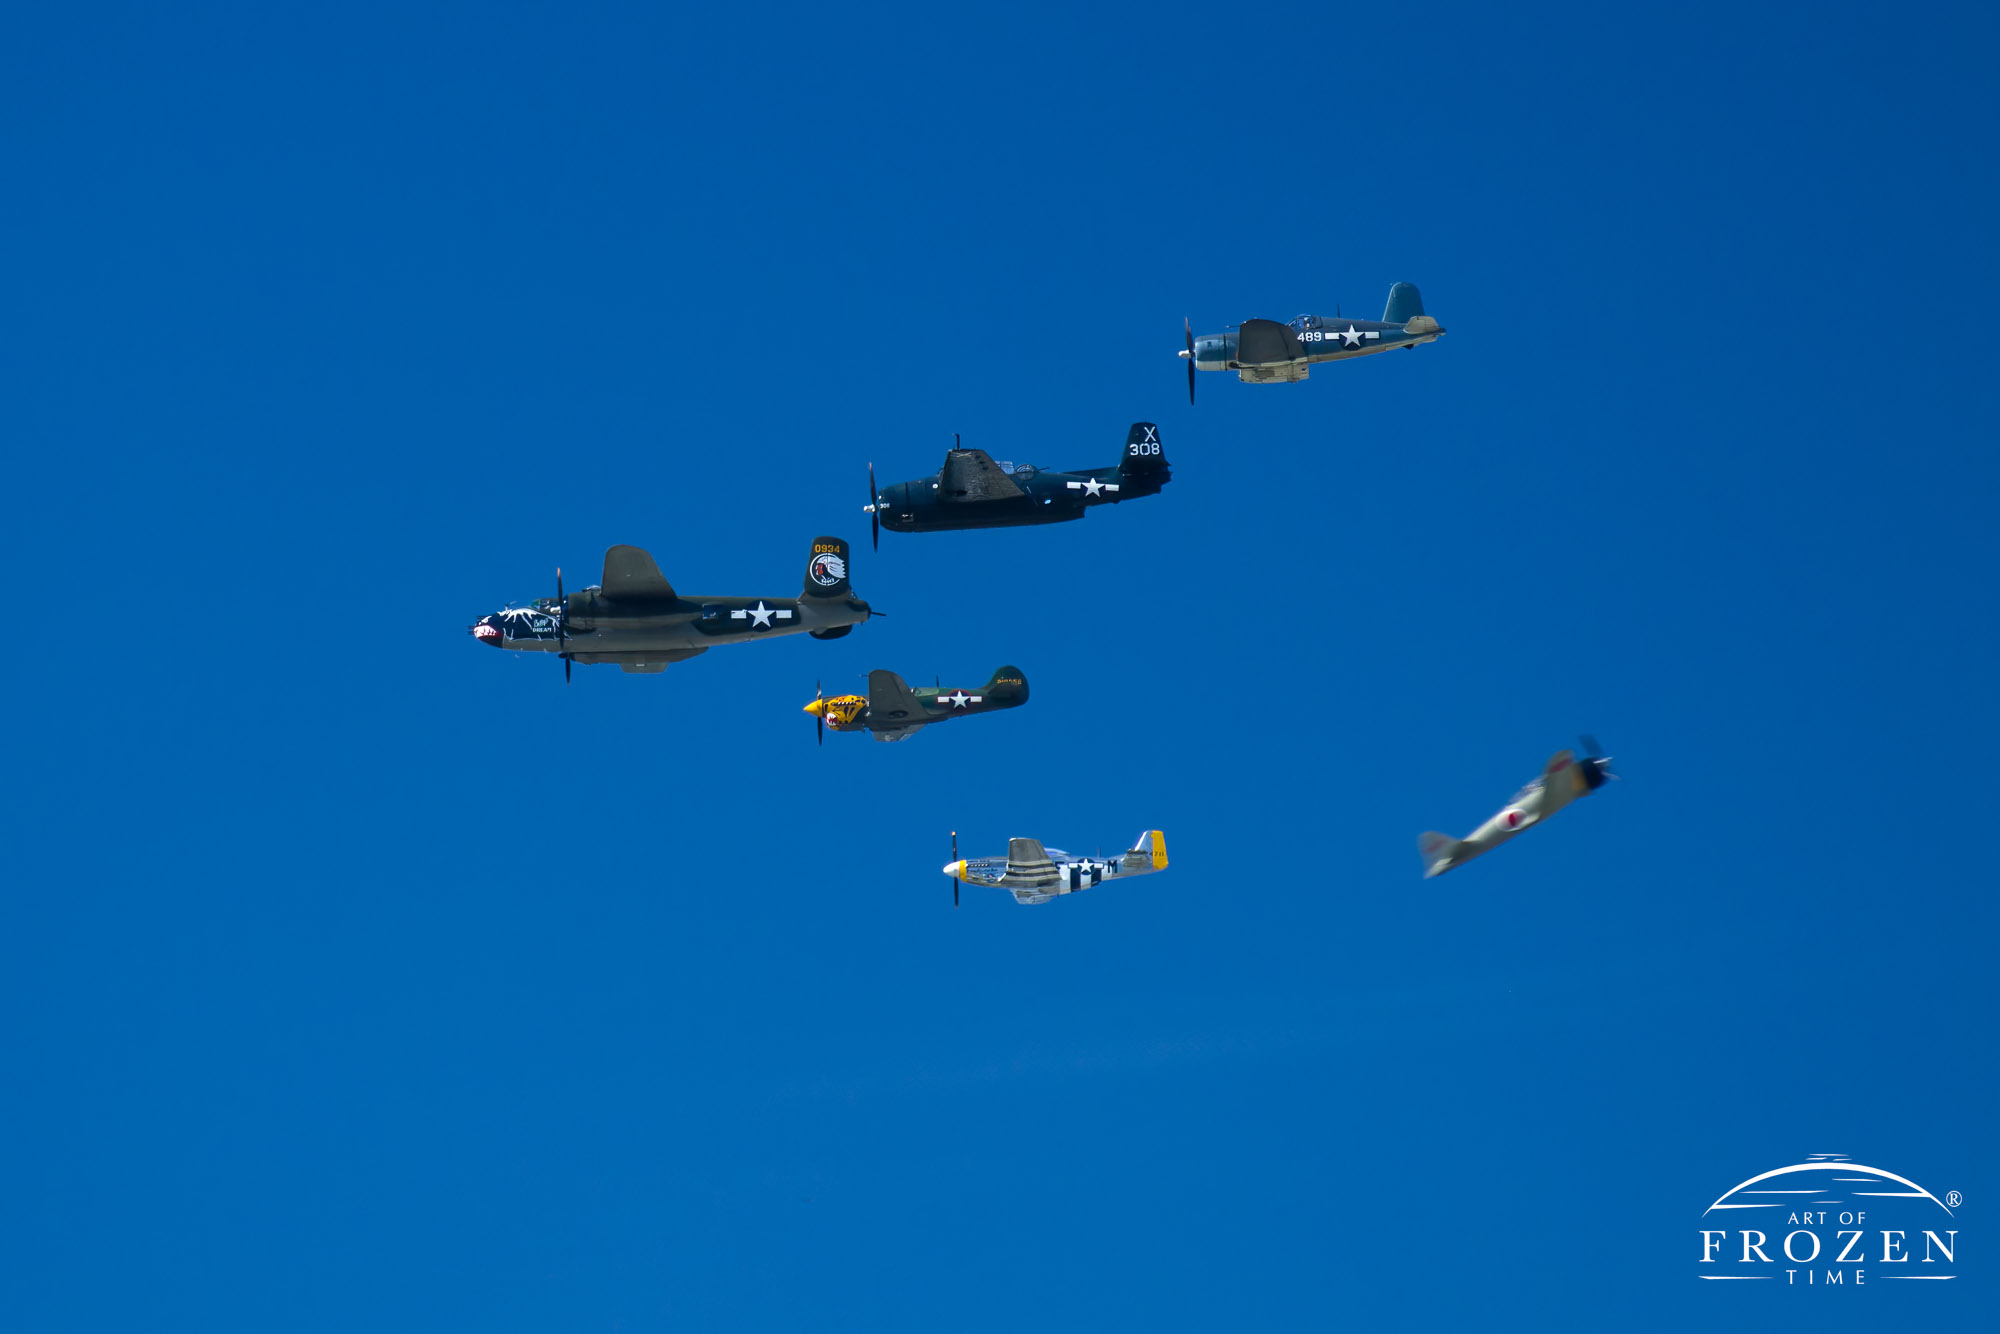 A formation of various WWII aircraft flying in formation as a re-enactment WWII Japanese zero zooms past from the opposite direction